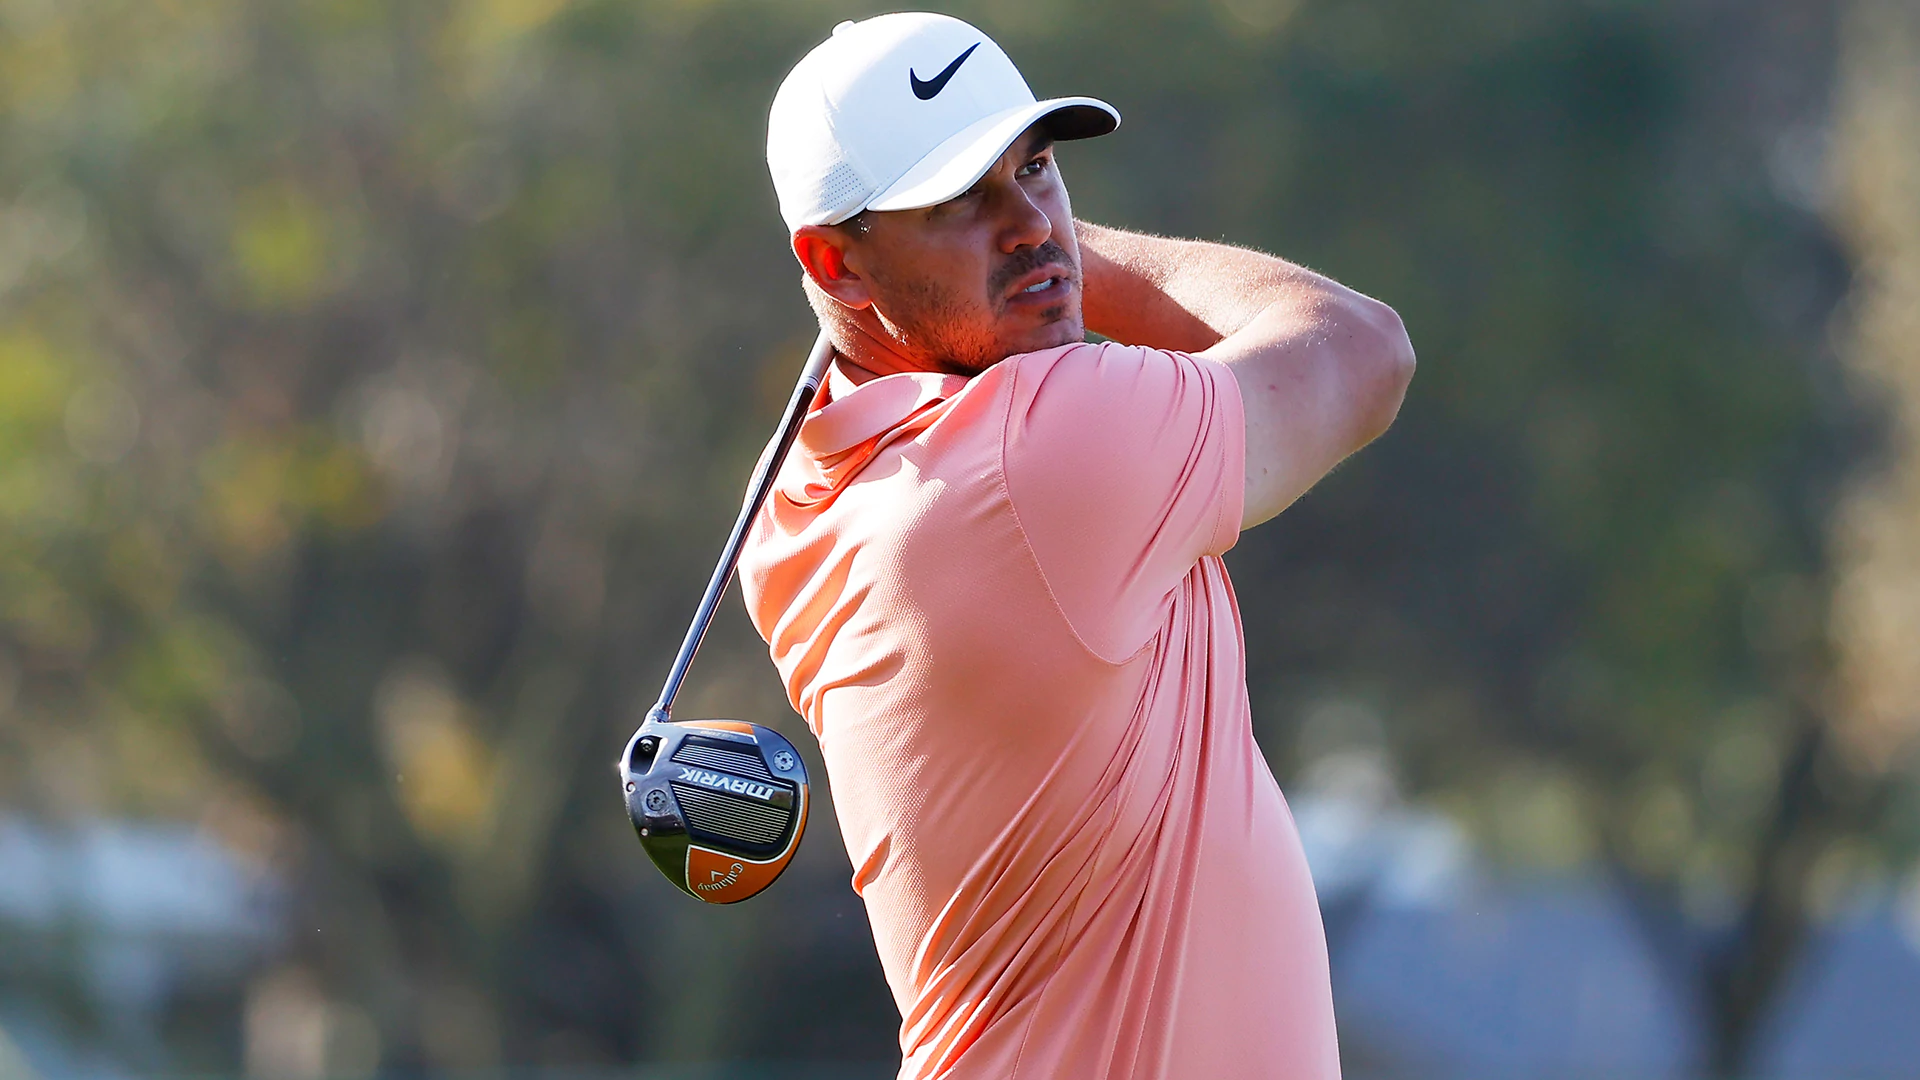 Brooks Koepka planning to play Colonial: ‘I’m going to be there’